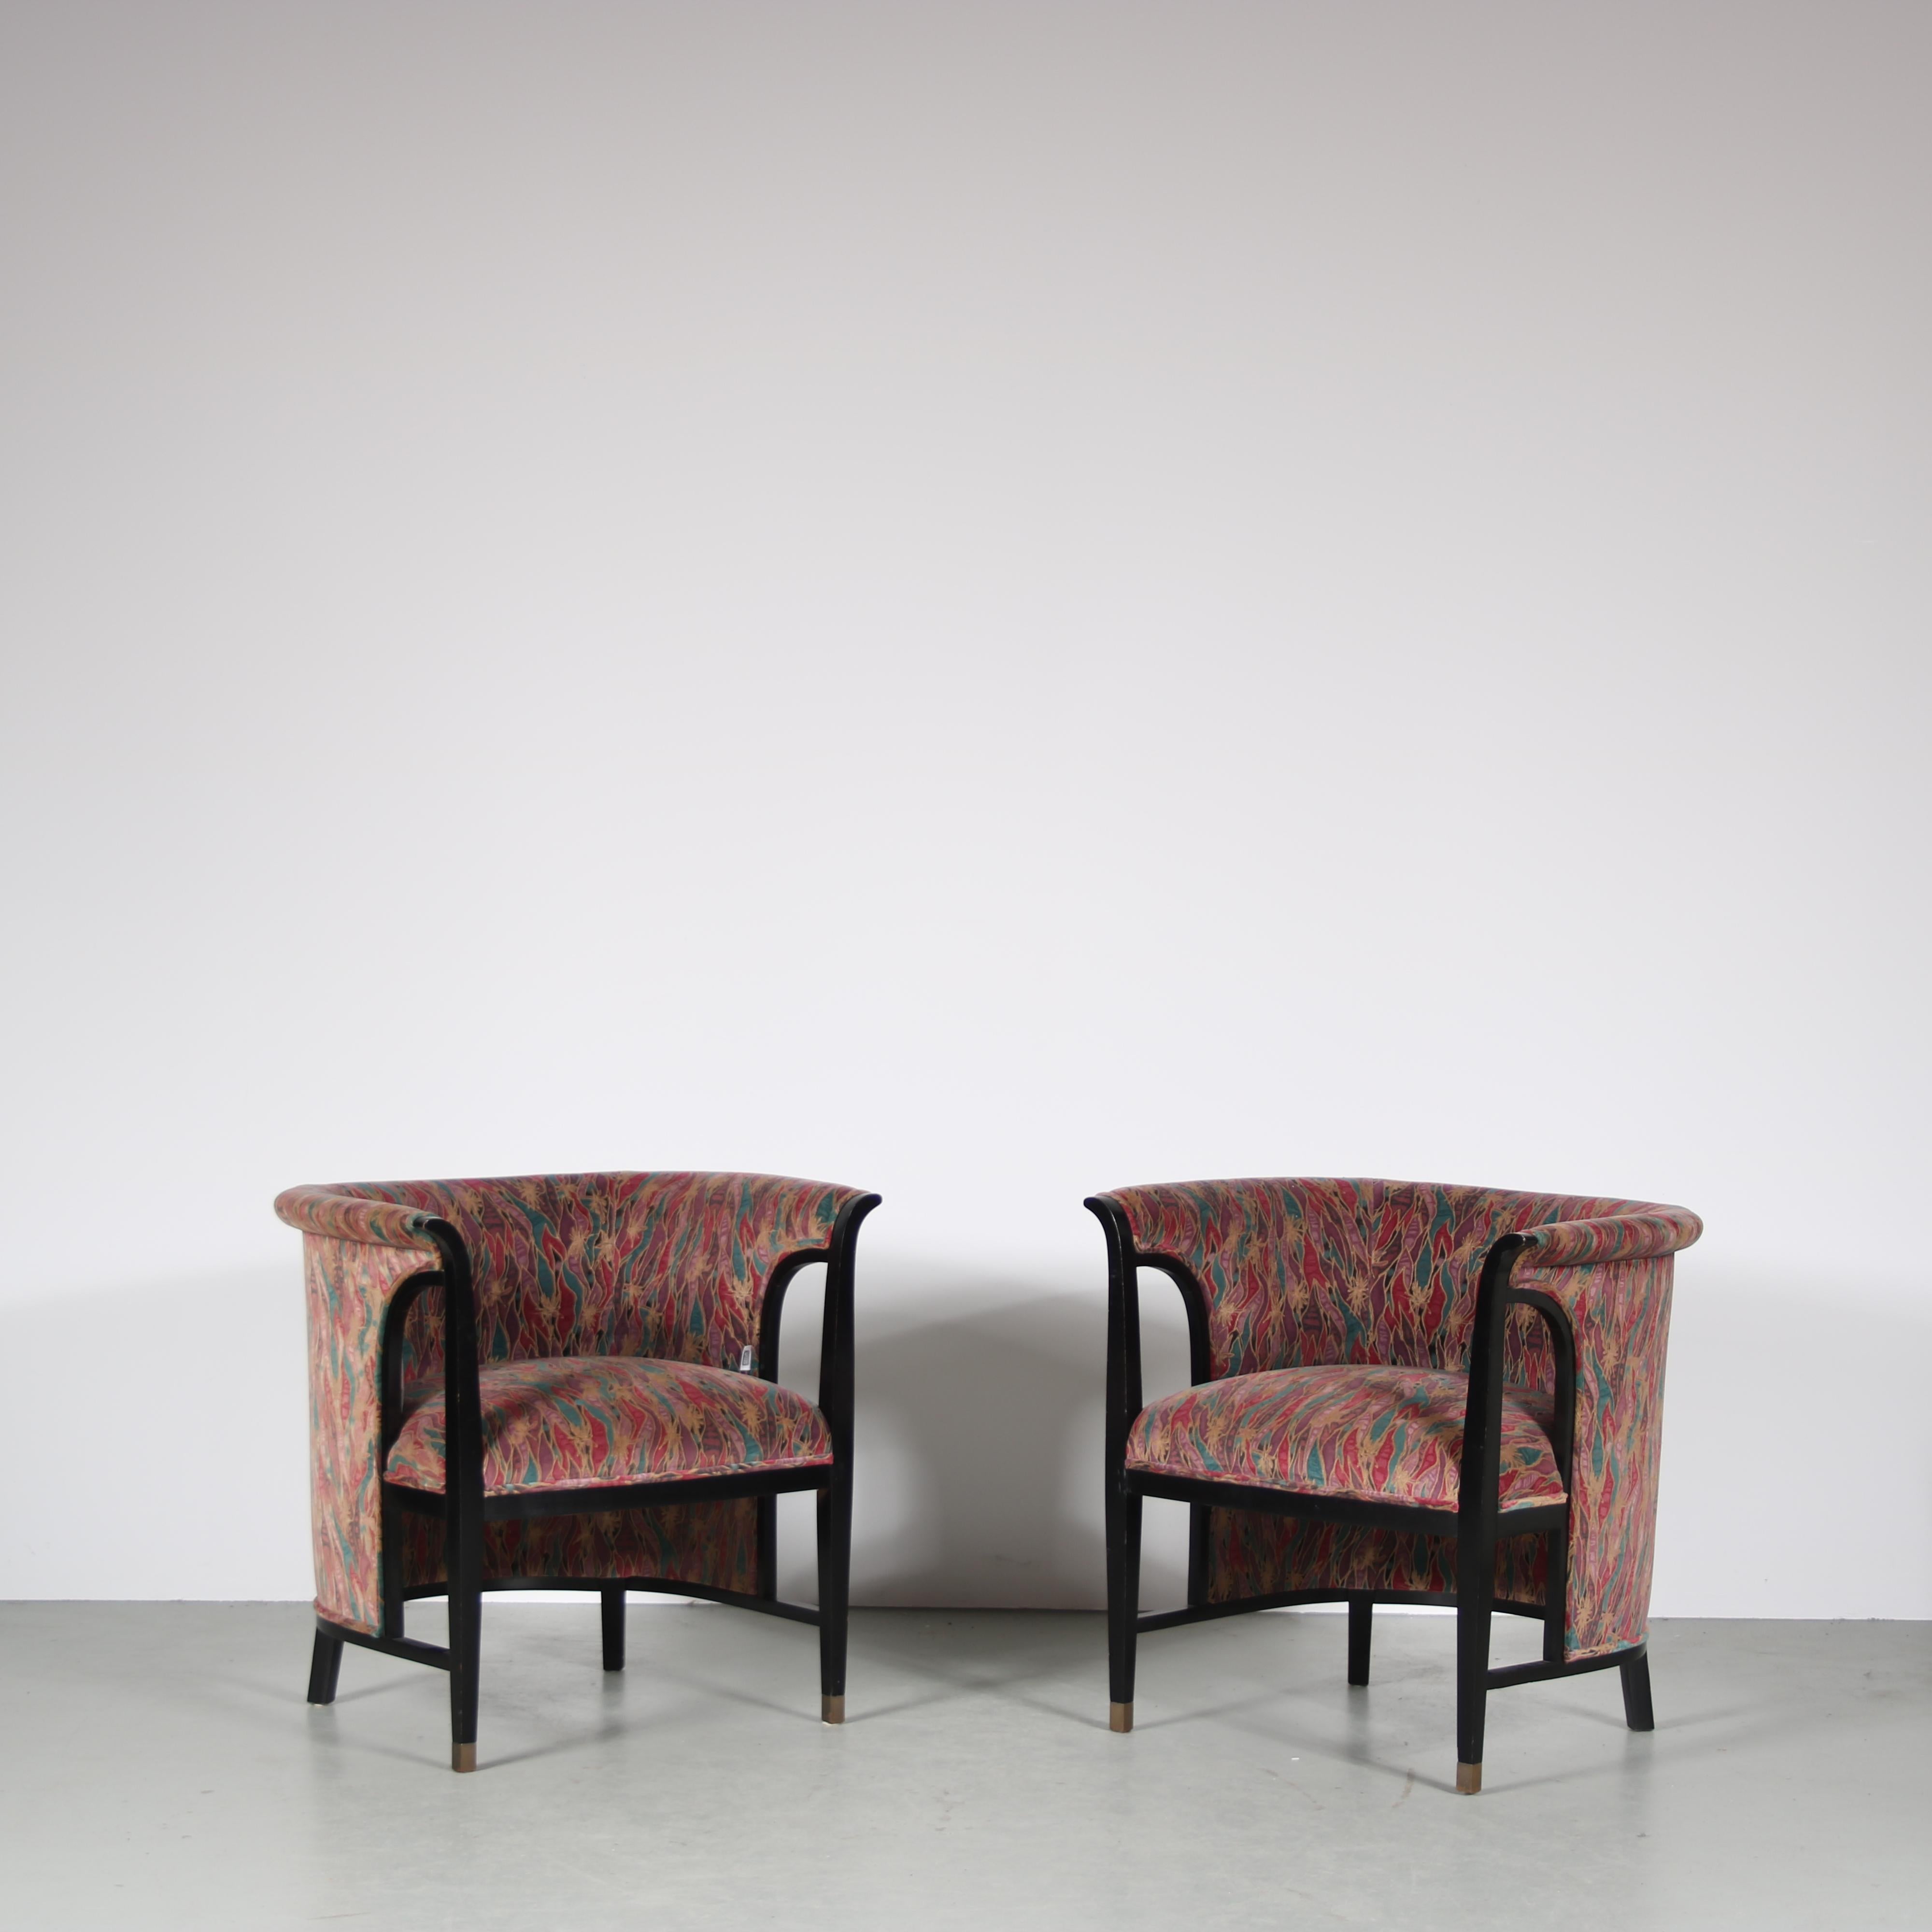 A unique pair of easy chairs designed and manufactured by Selva in Italy during the 1980s.

These chairs feature black wooden frames that have a very appealing, modern look with a touch of Art Deco. The leg ends have golden coloured details. The